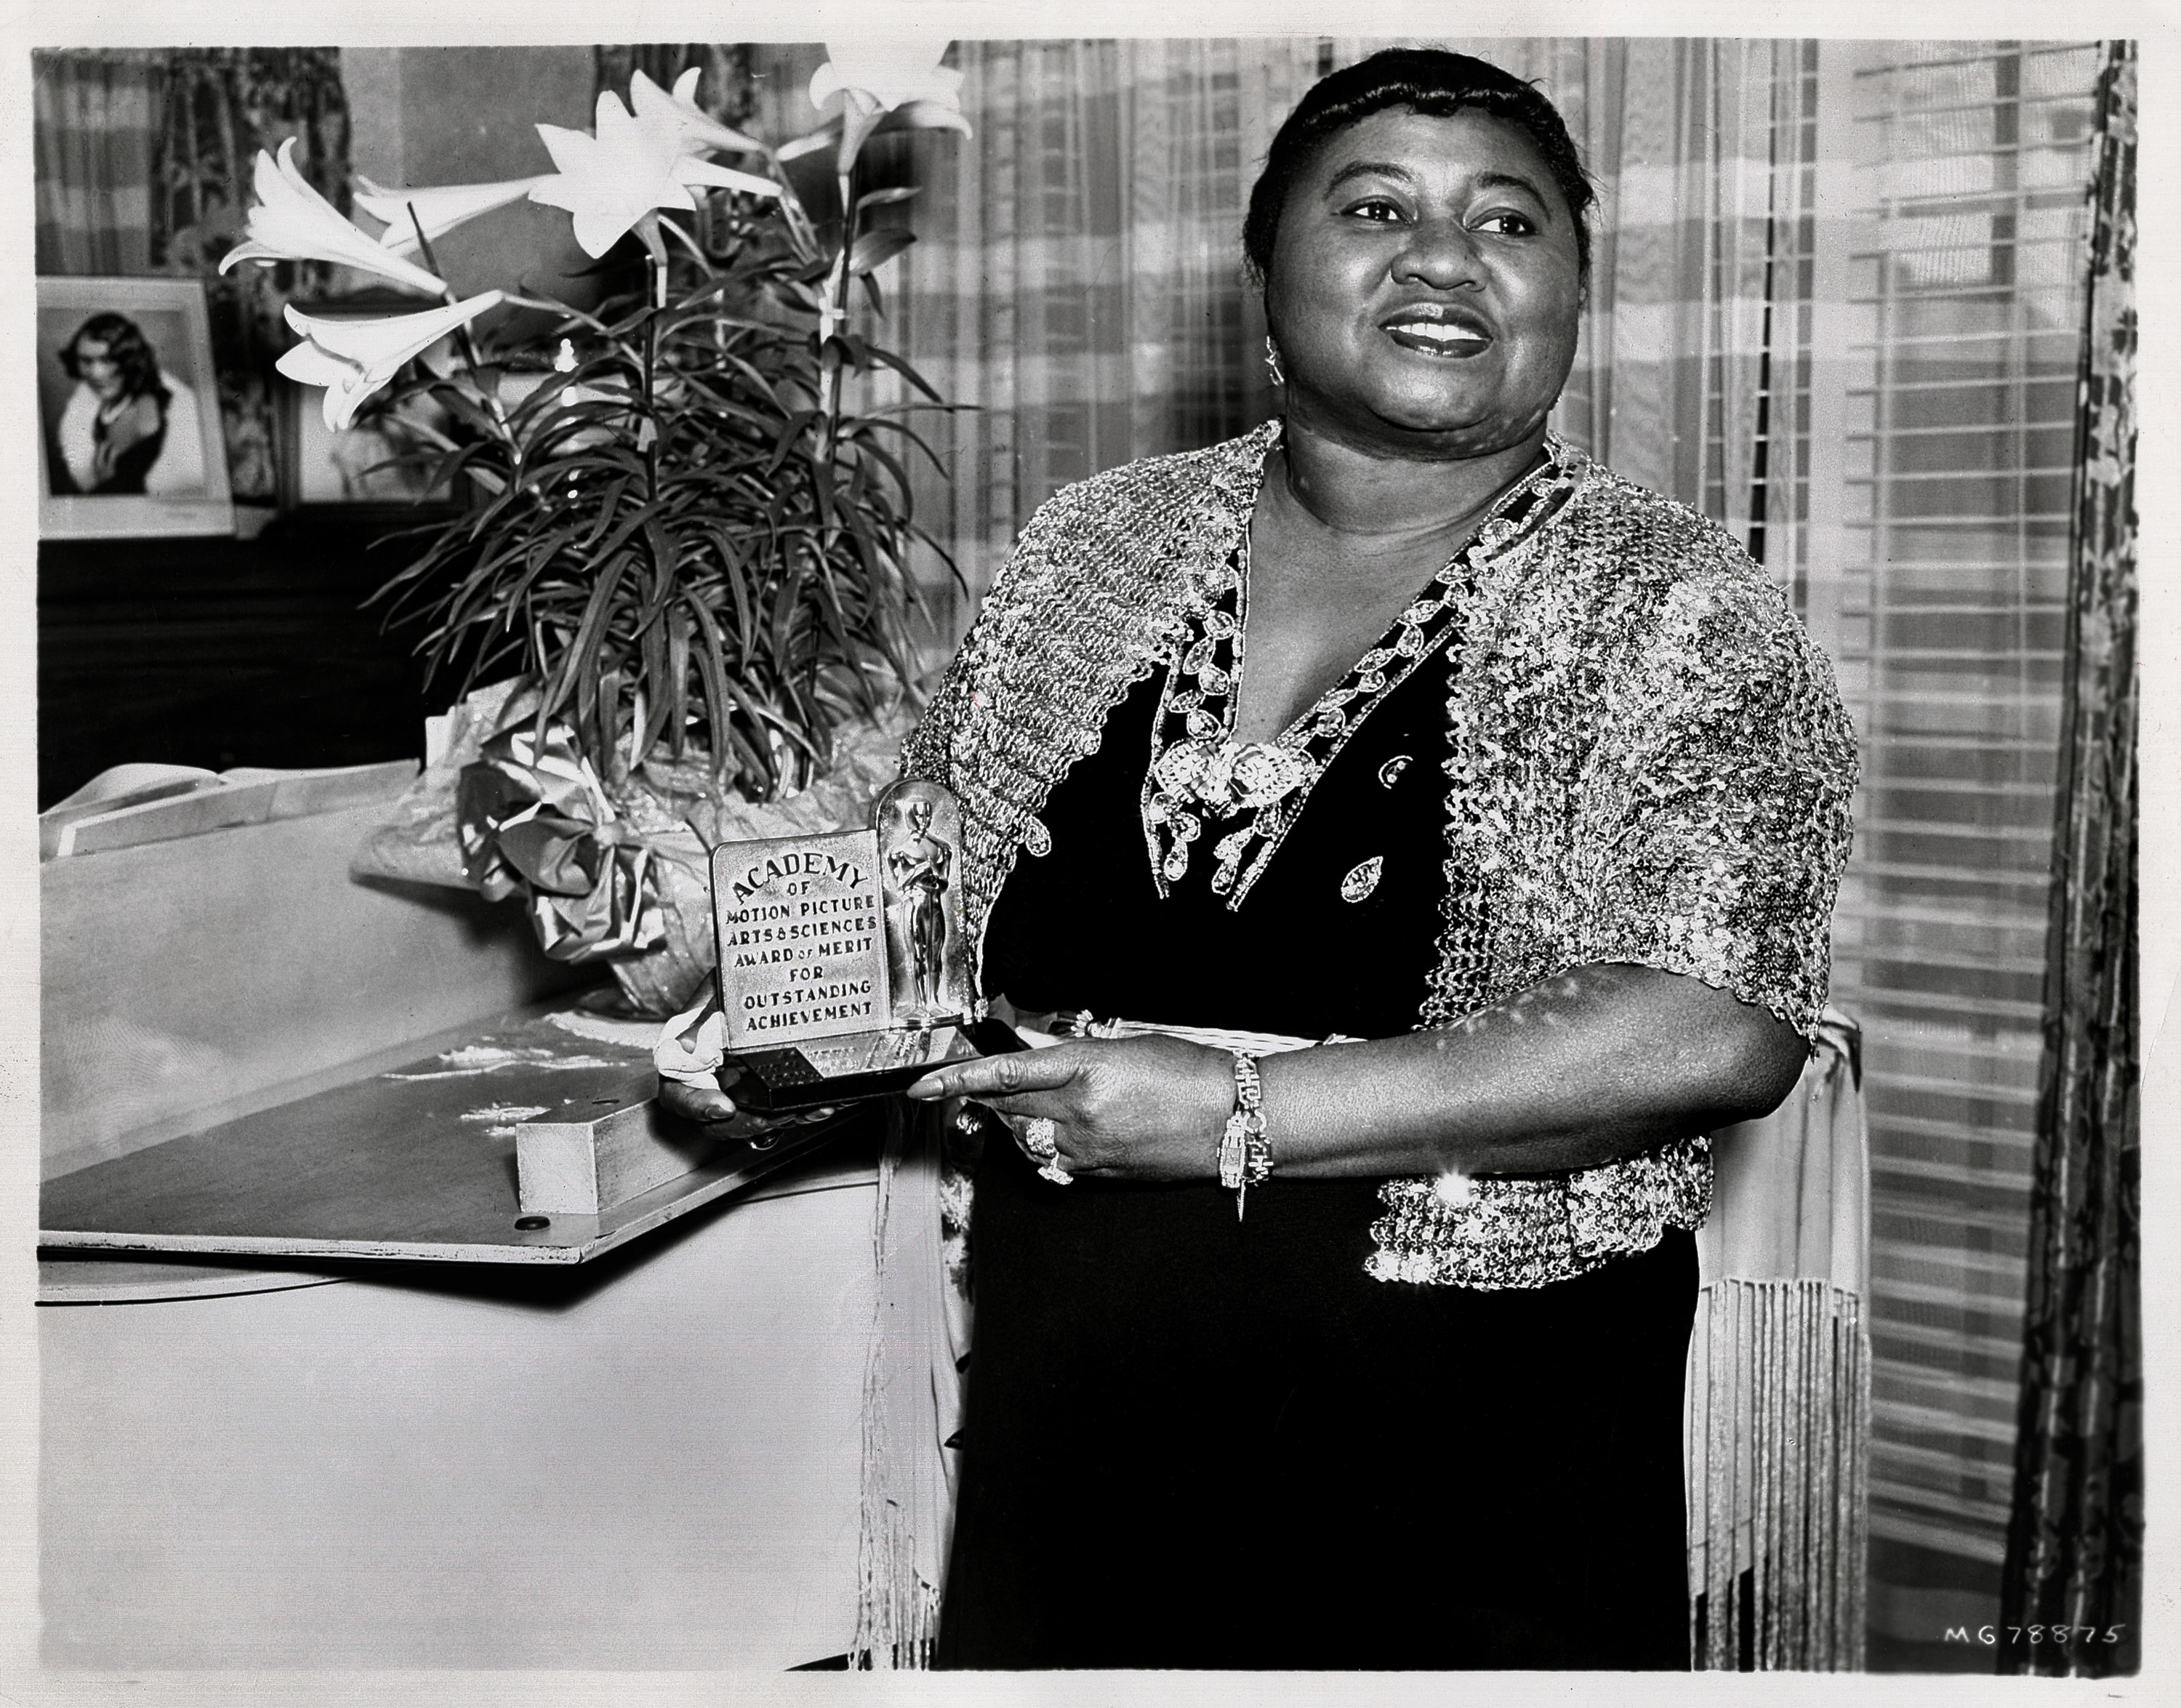 Portrait of American actress Hattie McDaniel (1892 - 1952) holding her Academy Award from the film &#x27;Gone With the Wind,&#x27; Hollywood, California, 1940